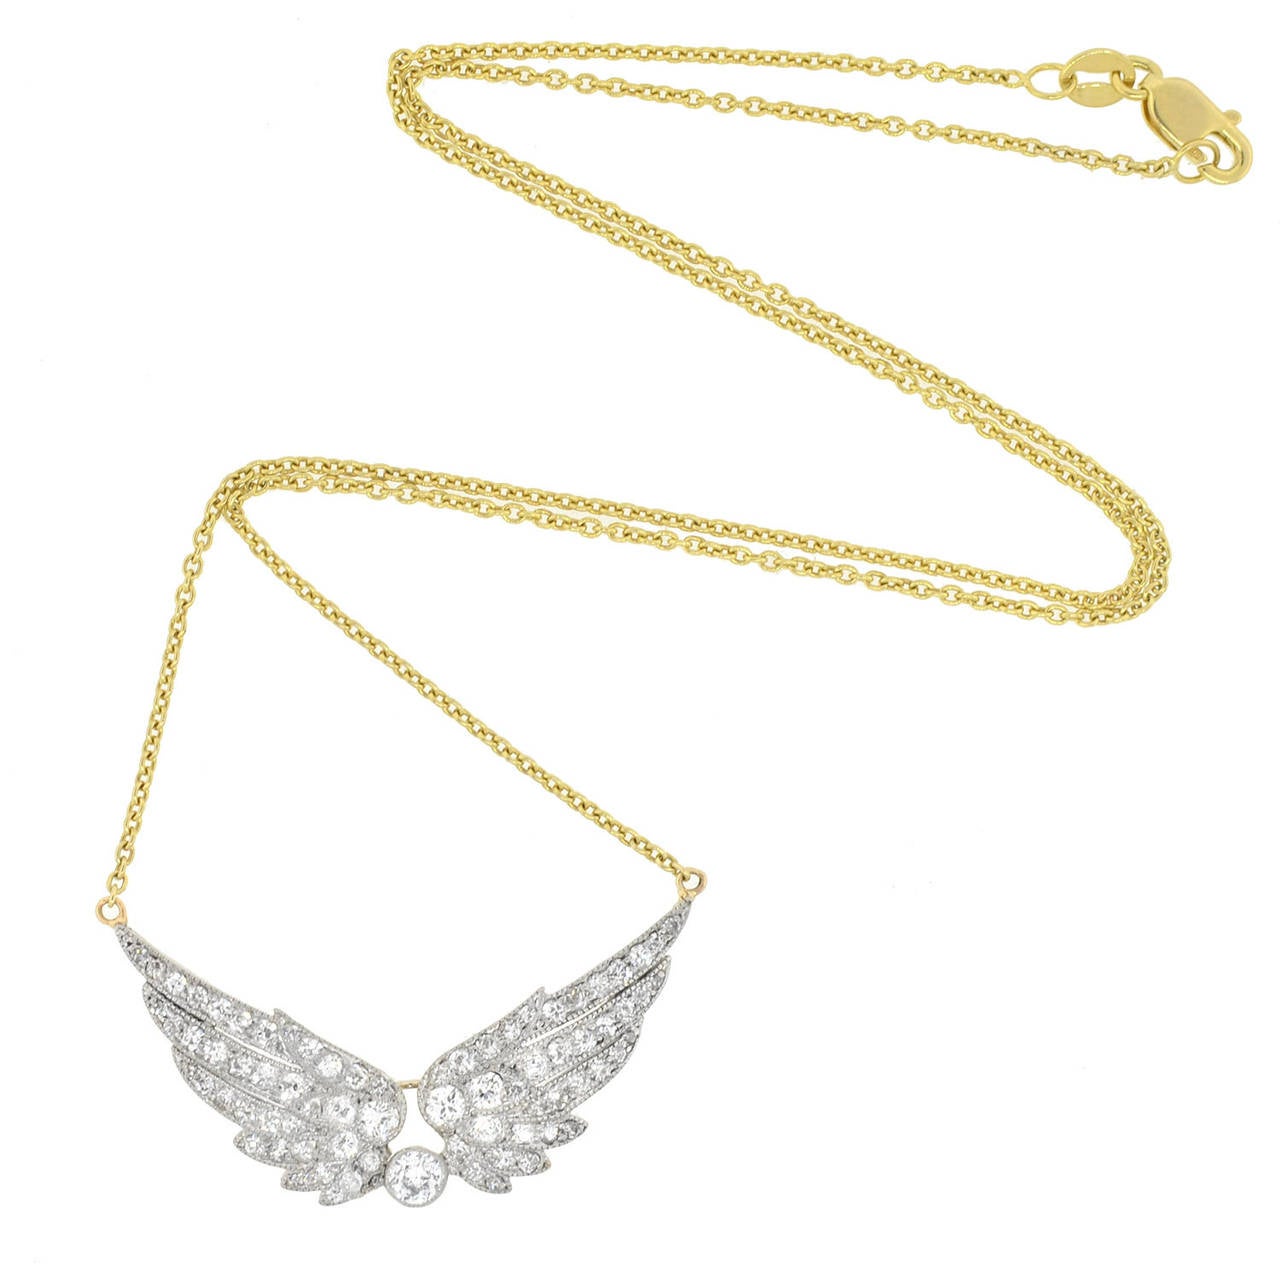 An absolutely stunning diamond wing necklace from the Edwardian (ca1910) era! This spectacular piece is comprised of a dazzling pendant that hangs from a fine gold cable chain. The pendant is made of platinum-topped 14kt yellow gold and depicts a